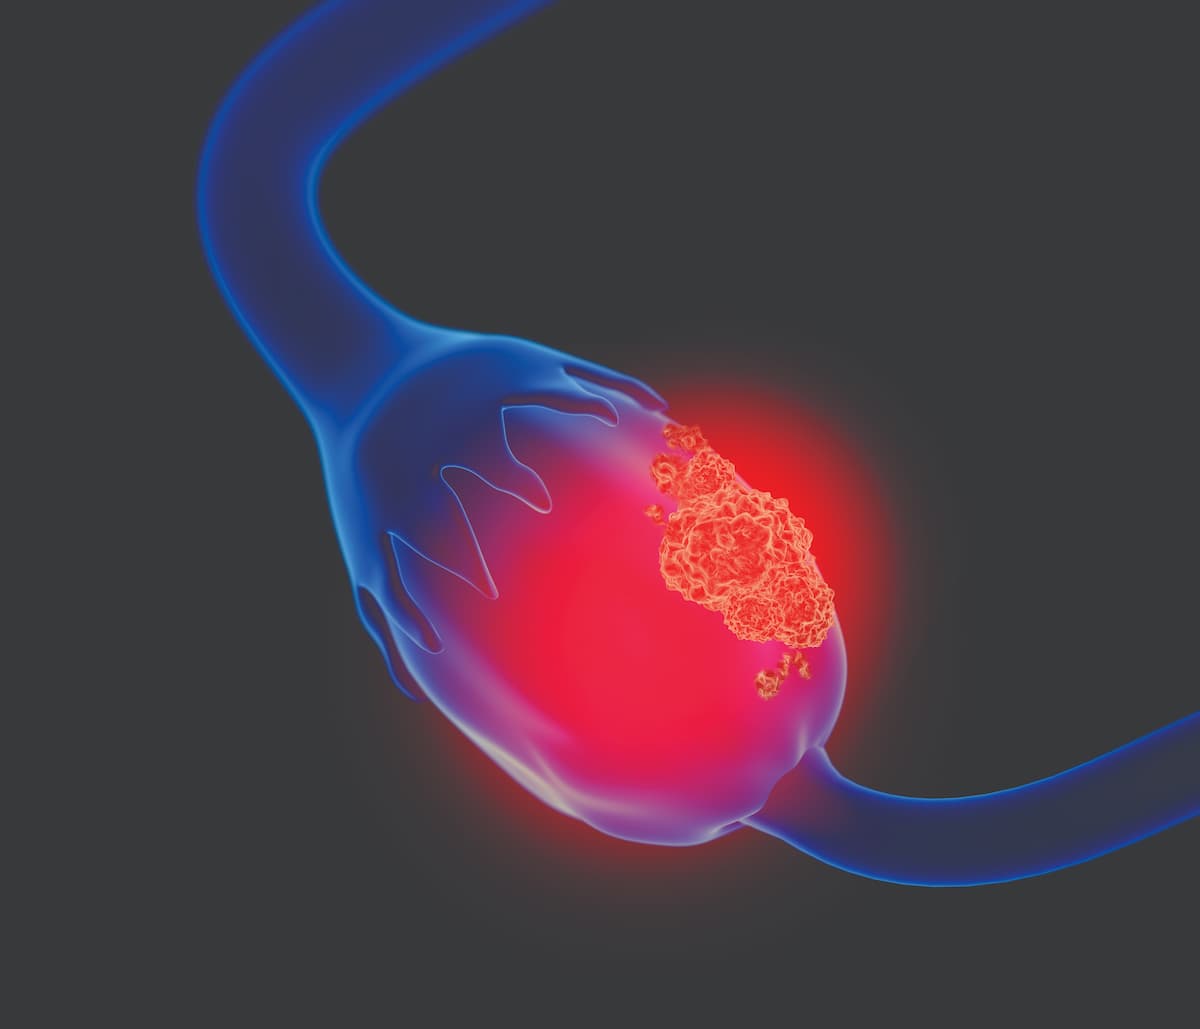 Investigators of the phase 3 PAOLA-1 trial stated that "all women with BRCA1/BRCA2 mutations" in ovarian cancer may "derive benefit from maintenance therapy with olaparib and bevacizumab."